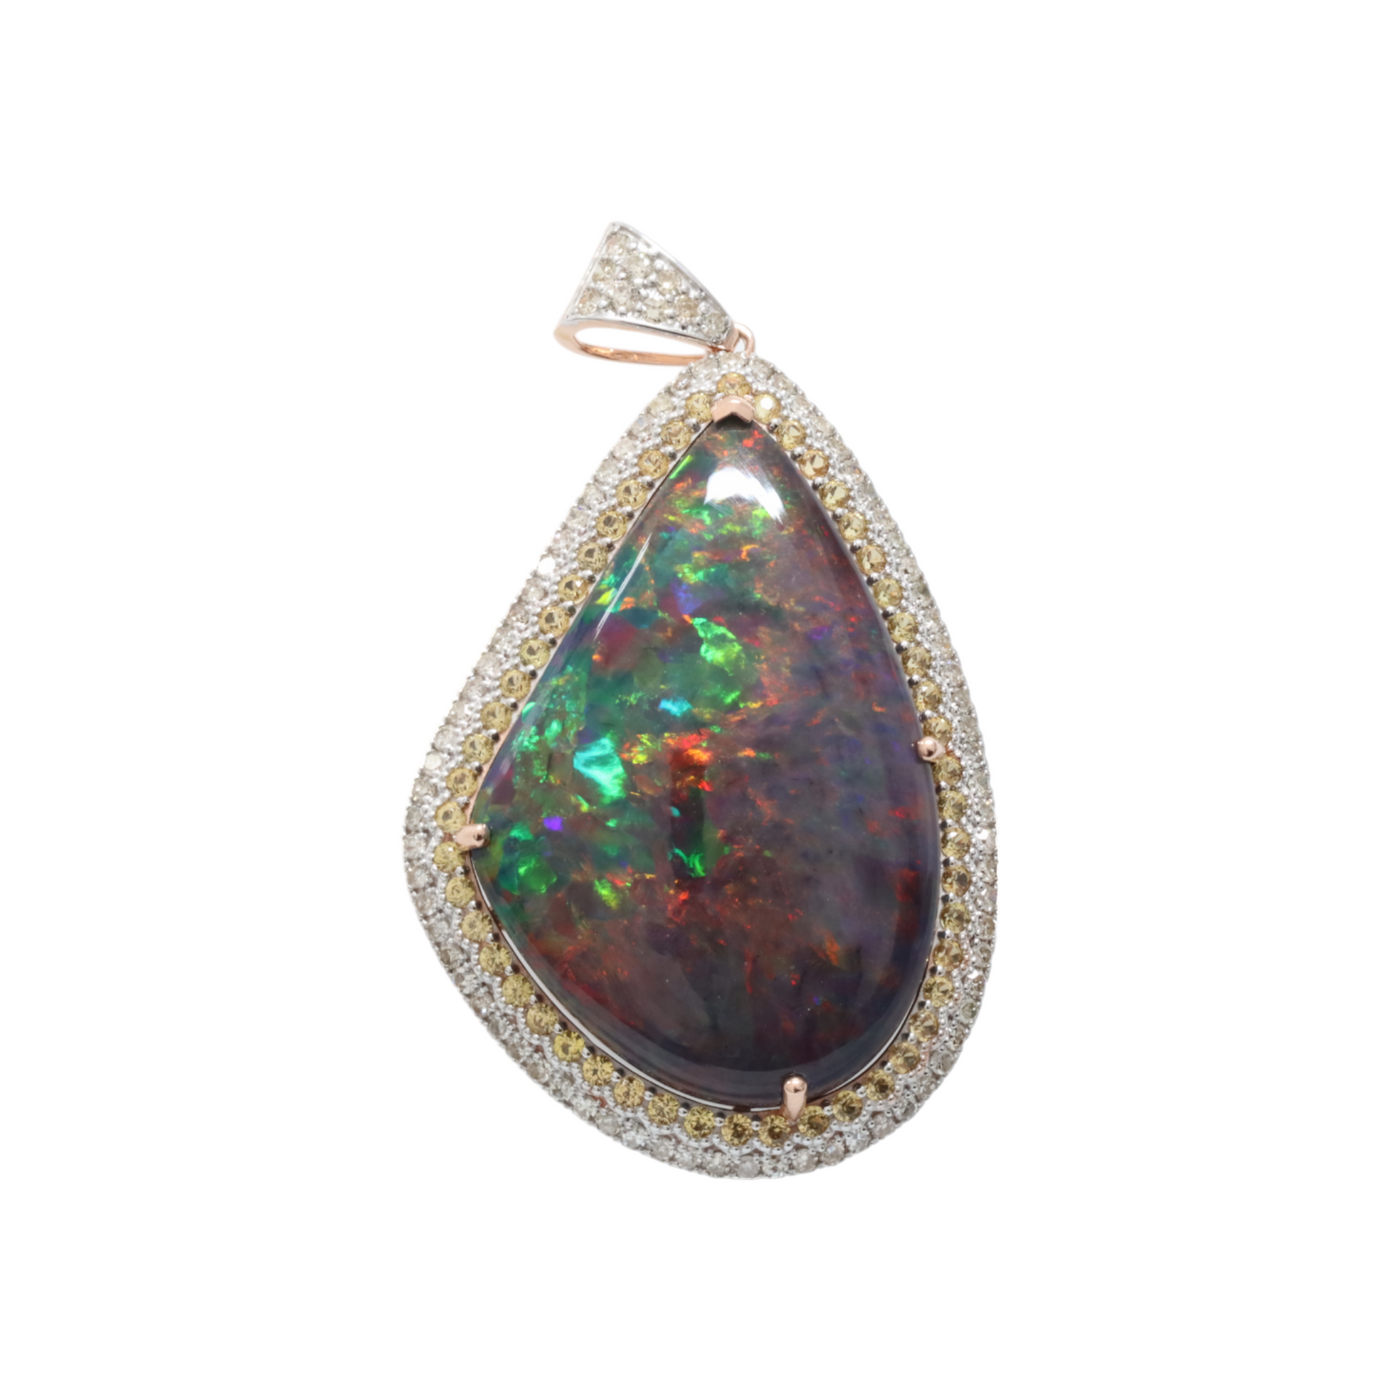 Ethiopean Opal, Sapphires and Diamonds in 14ct Yellow Gold